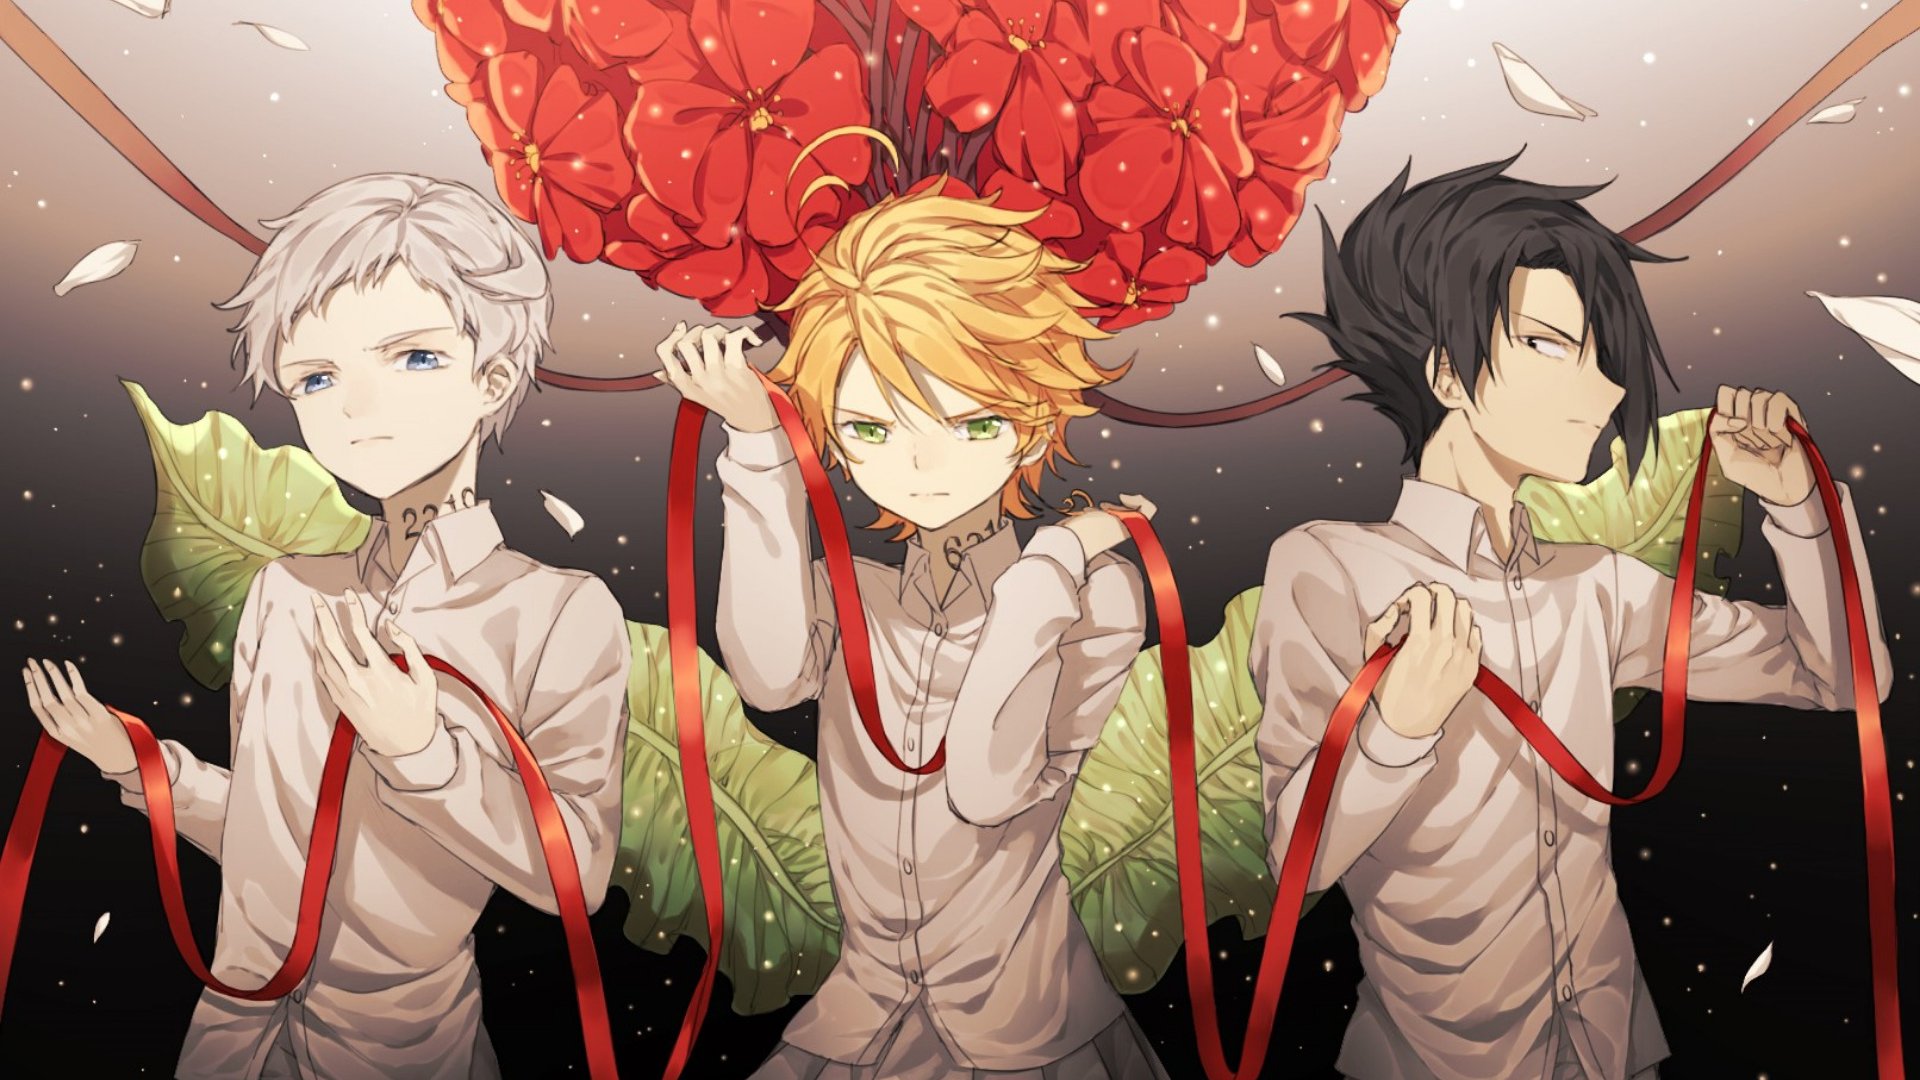 Anime, Emma, Norman, Ray, The Promised Neverland Wallpapers & Backgroun...